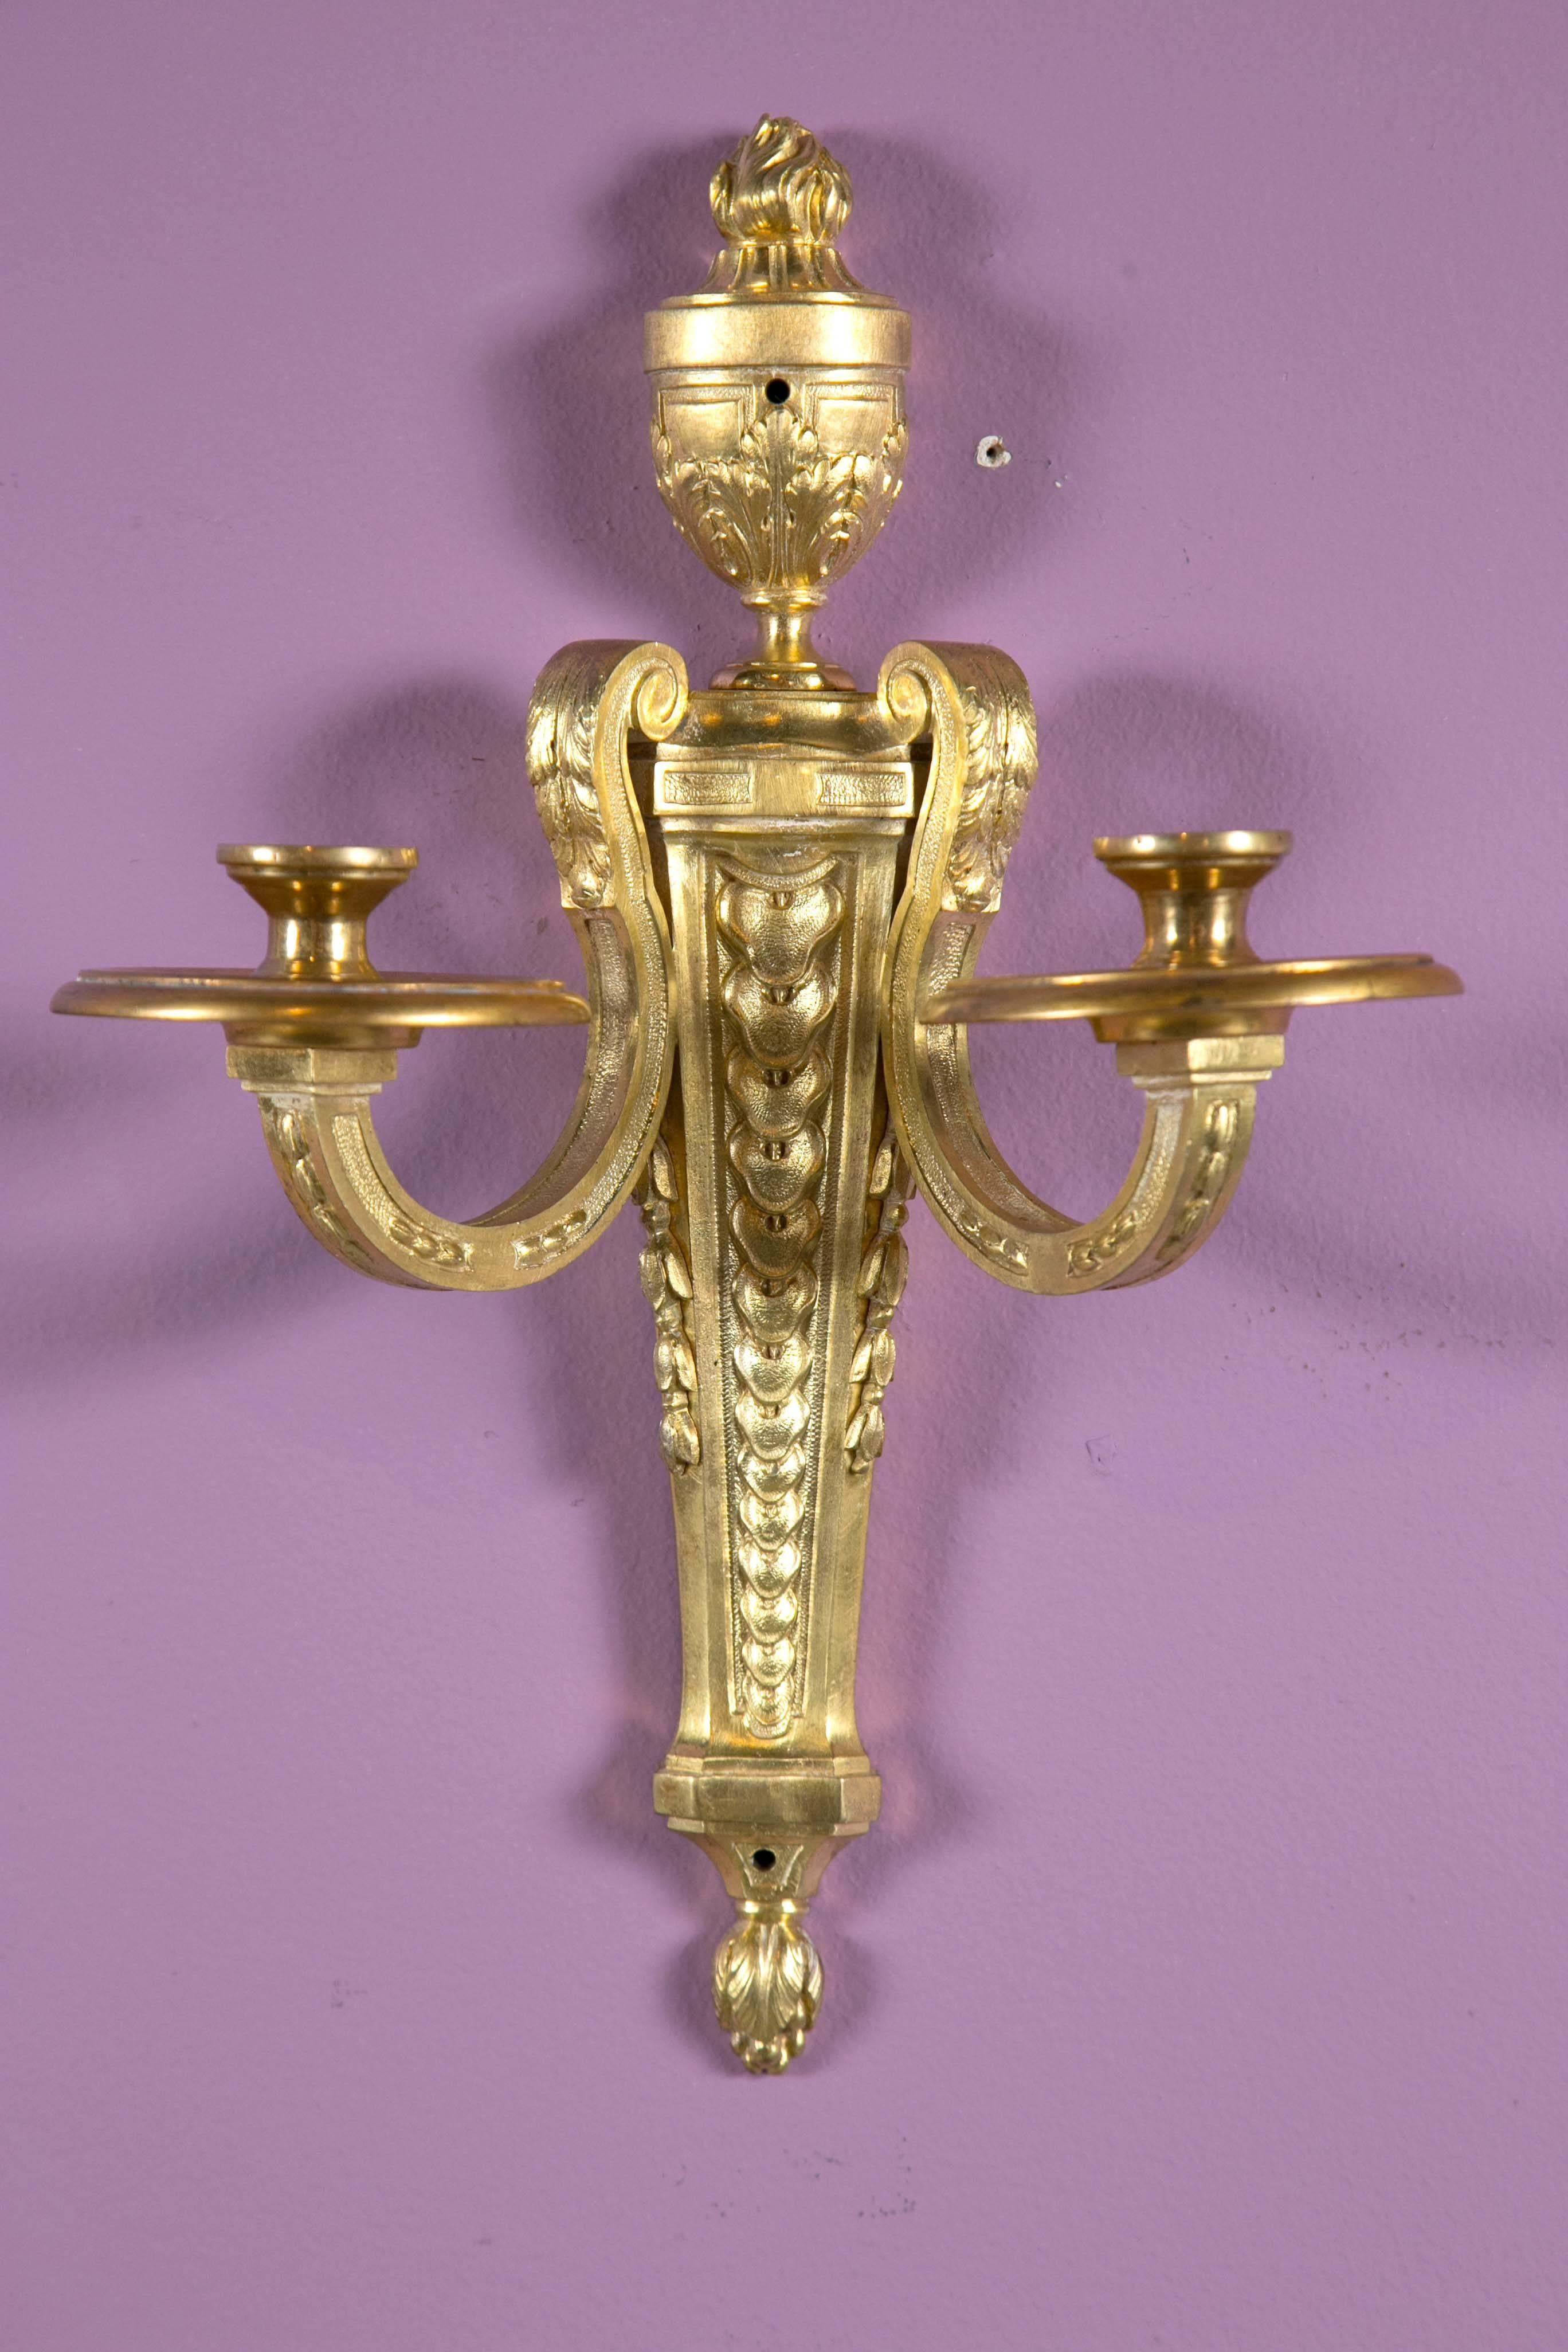 This beautiful pair of Caldwell sconces are a statement piece for that special room, circa 1920. Priced per pair.